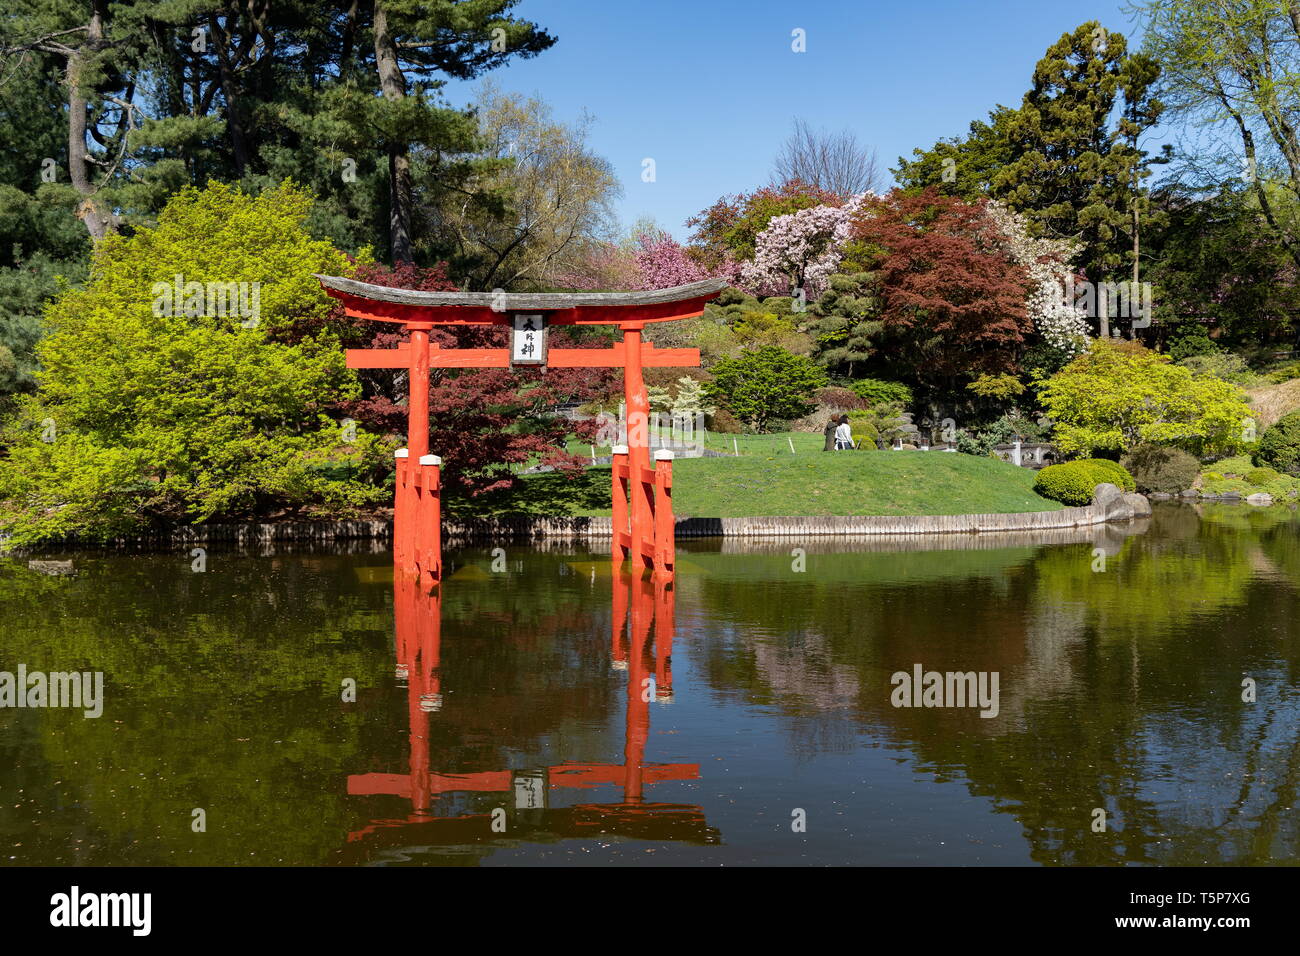 Torii Gate At The Japanese Hill And Pond Garden In Brooklyn